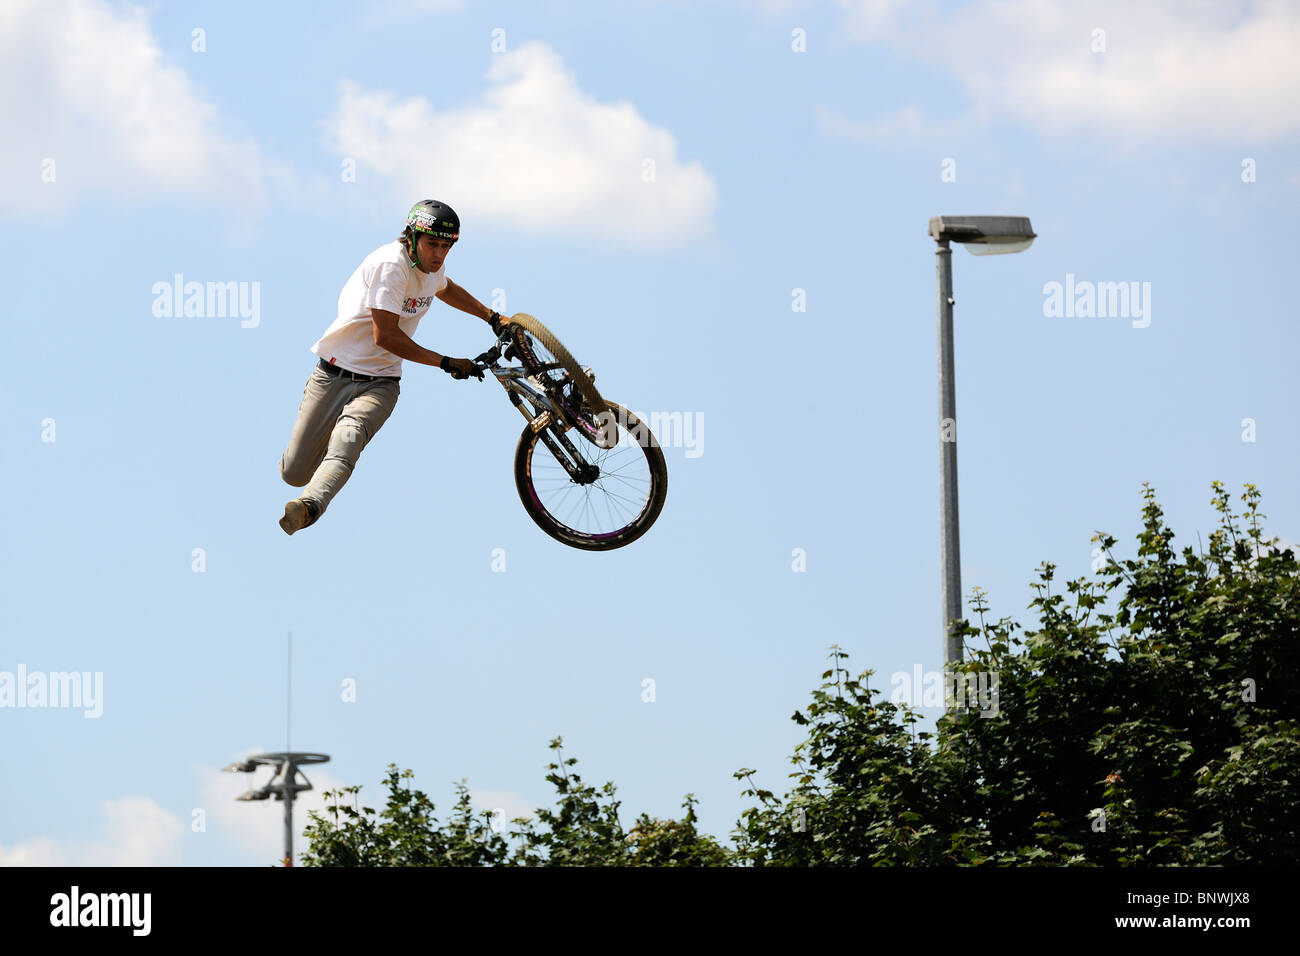 An unidentified contestant participates in a BMX/Mountain Bike contest. Stock Photo